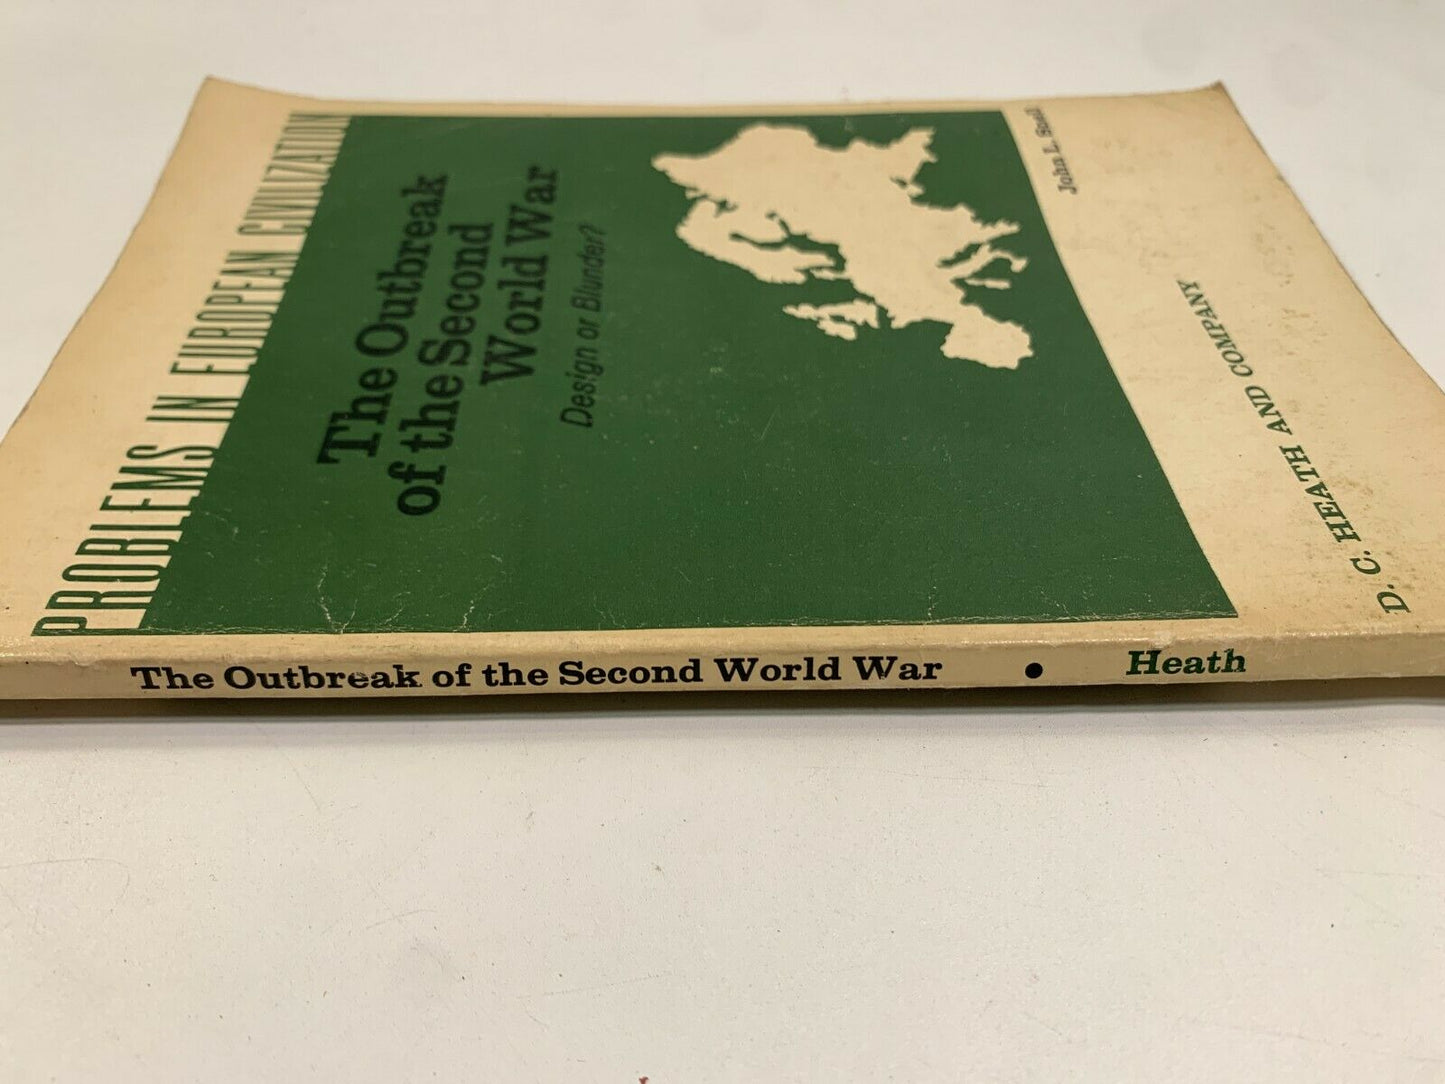 The Outbreak of the Second World War: Design and Blunder? by John L. Snell 1962